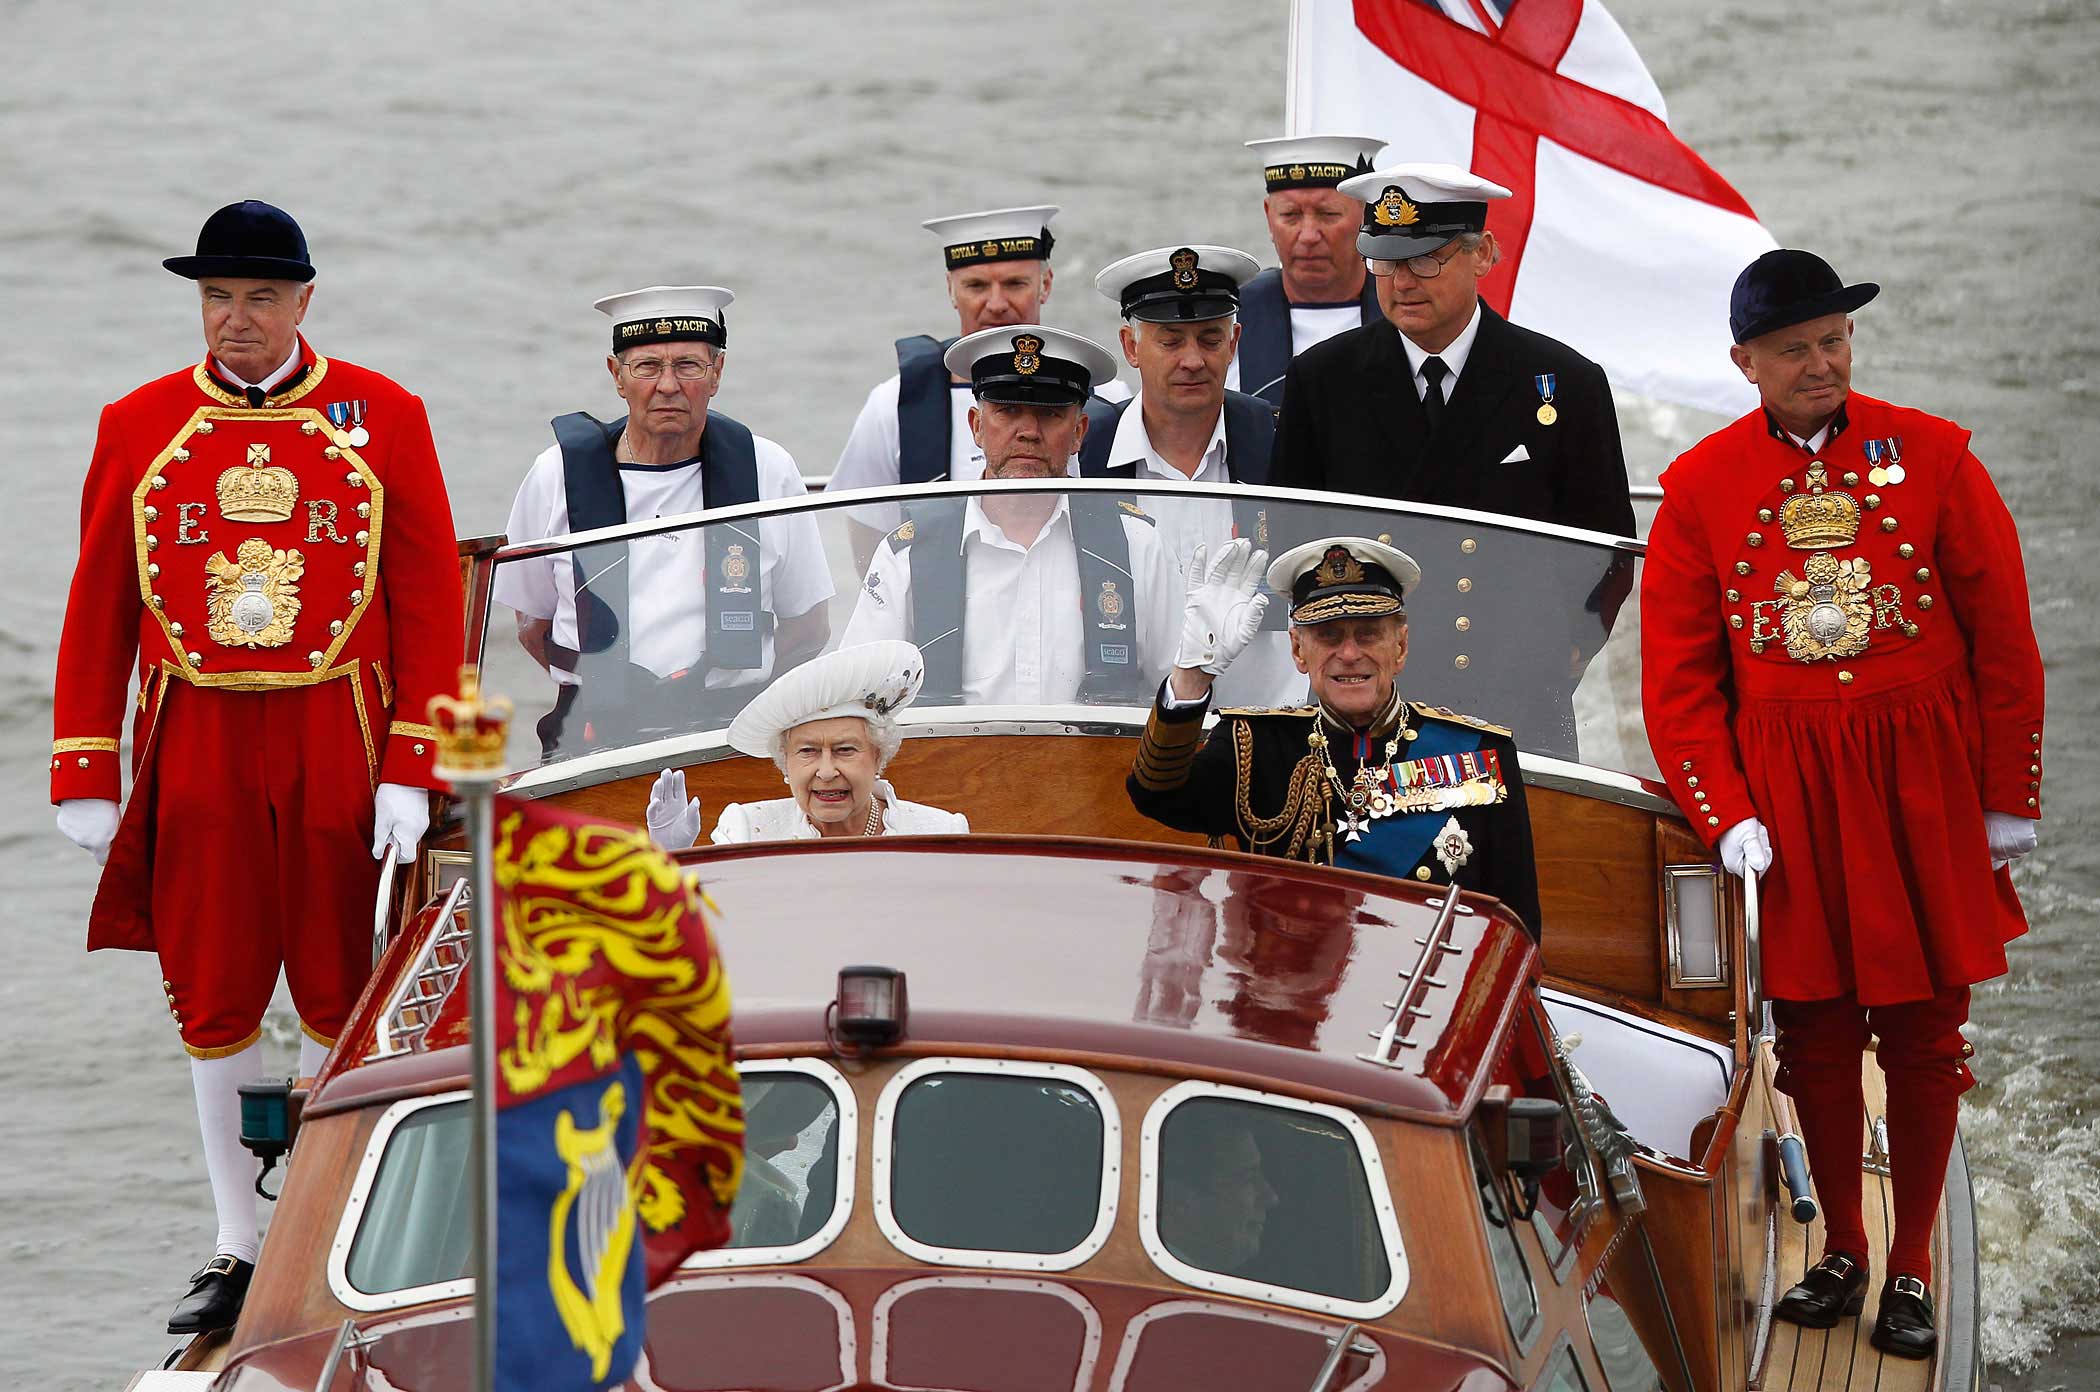 Britain's Queen Elizabeth and Prince Philip wave during a pageant in celebration of the Queen's Diamond Jubilee in London